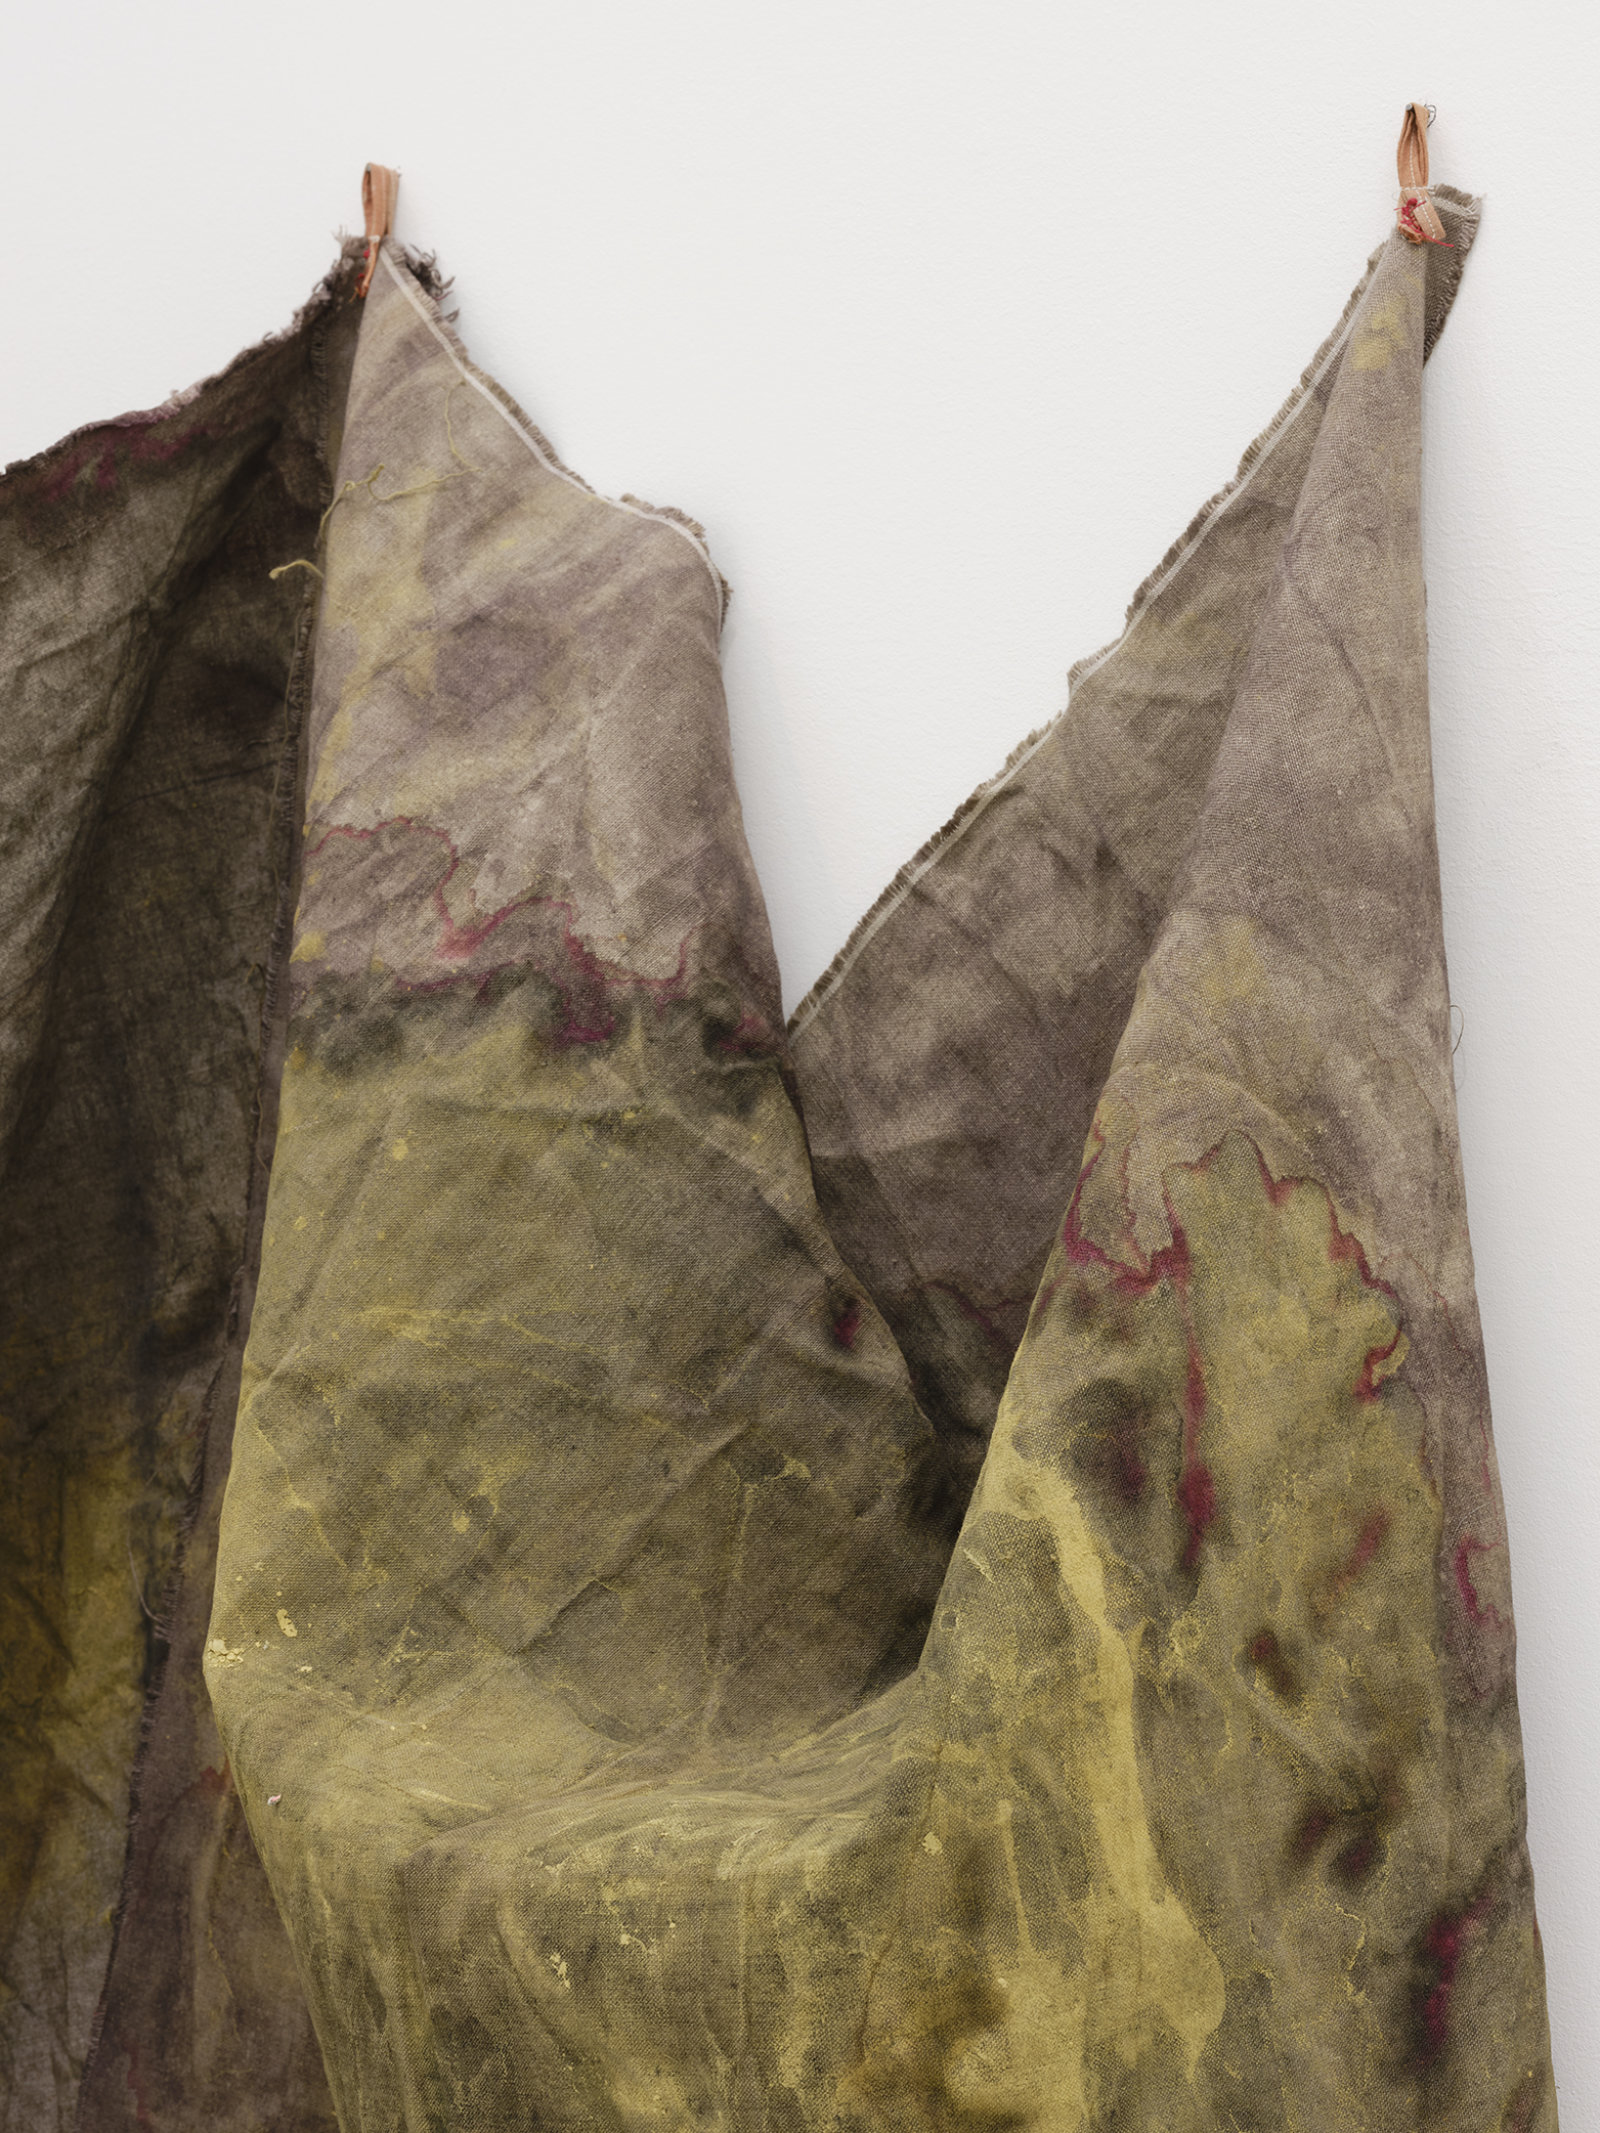 Duane Linklater, aspirated fragment (detail), 2021, digital print on linen, cochineal dye, yellow ochre, honey, charcoal, nails, 62 x 49 x 12 in. (158 x 125 x 31 cm)